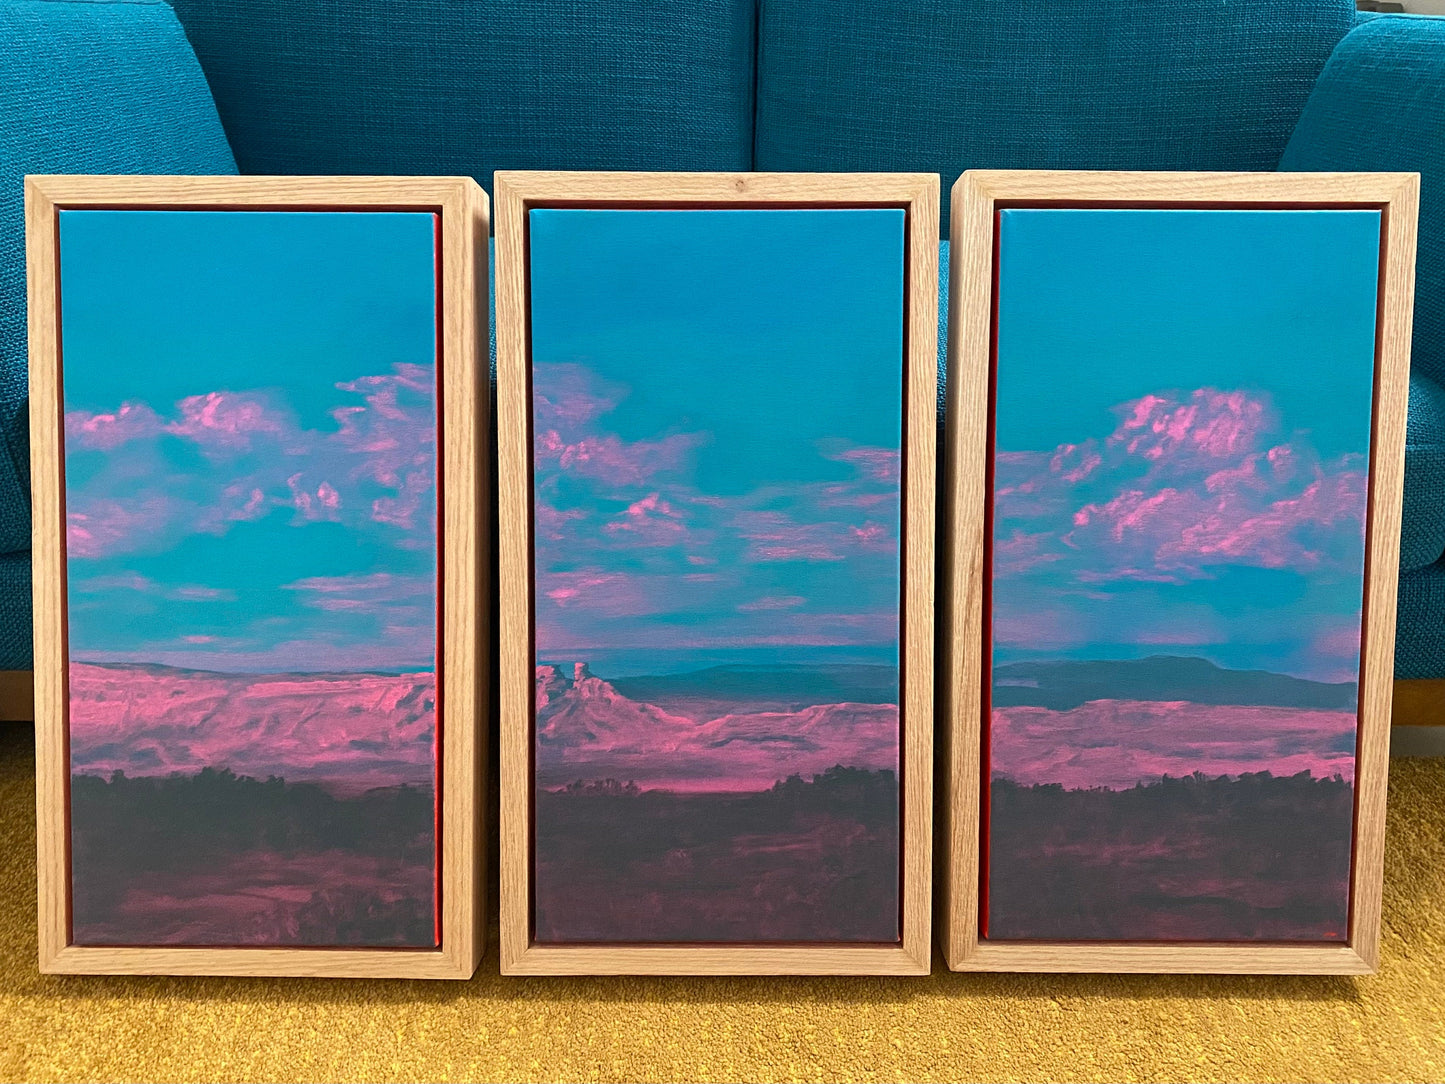 Ghost Ranch Triptych No.1 - Original Oil Paintings - Contemporary Southwest Landscape - Three 10 x 20 inch canvases in handmade frames